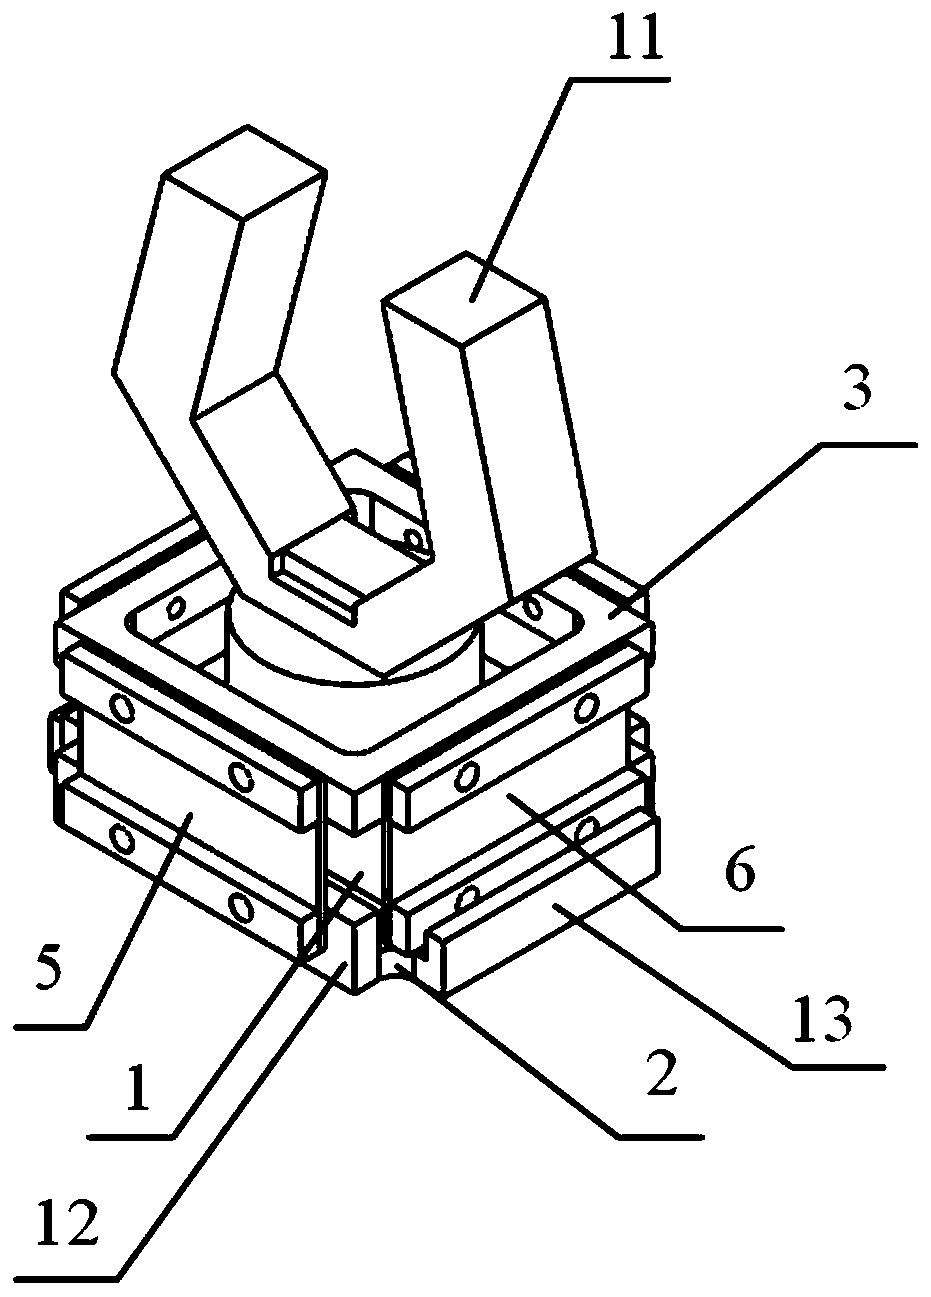 Adaptive two-dimensional force feedback wrist connector and sensor for light-duty robotic arm